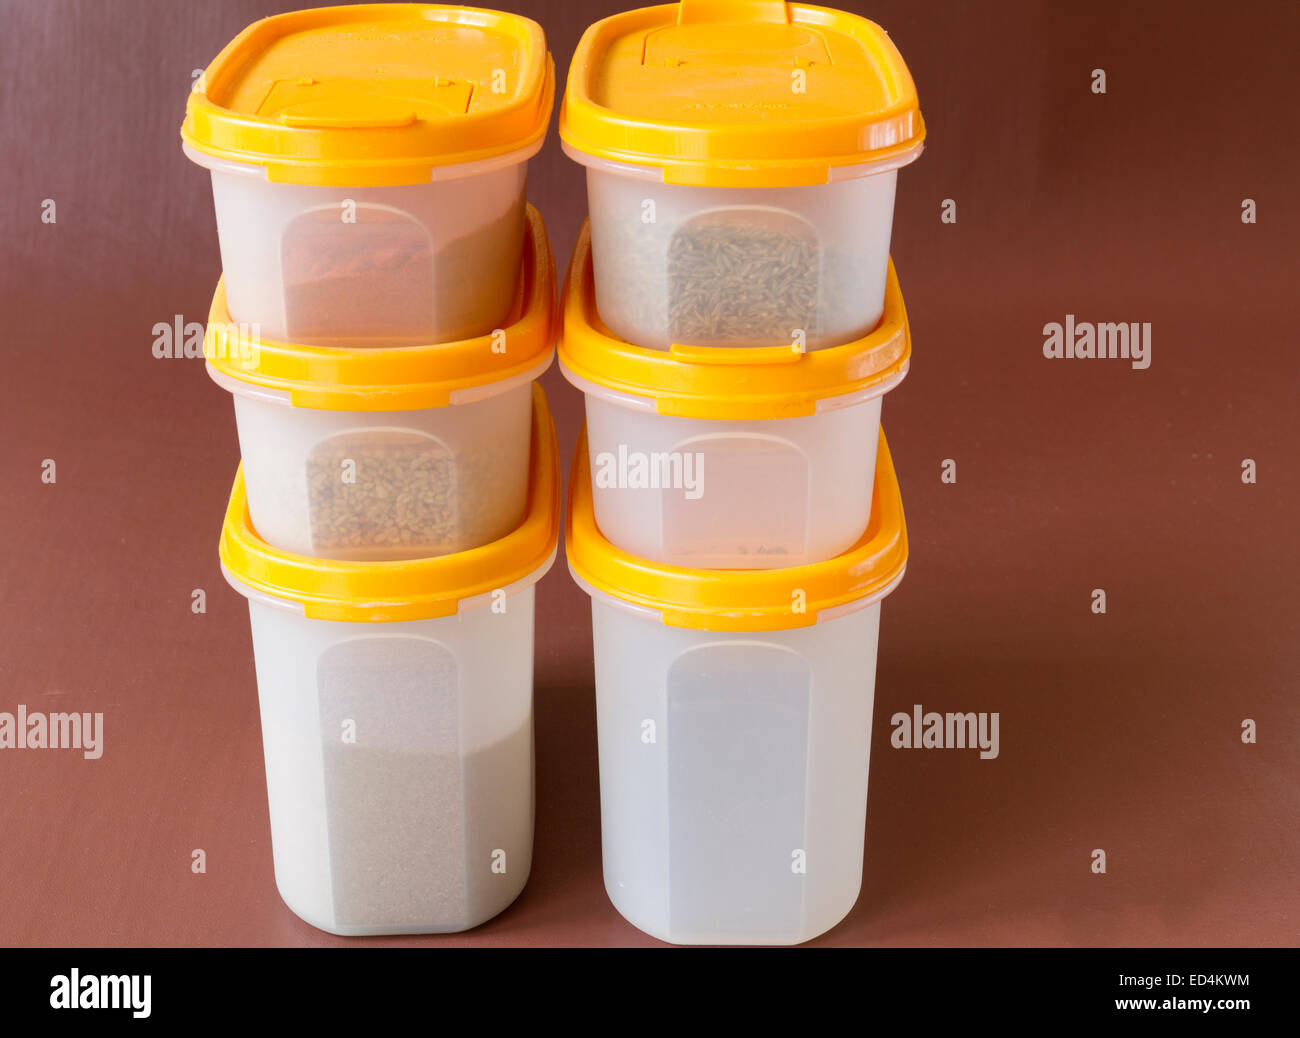 Tupperware food storage containers Stock Photo